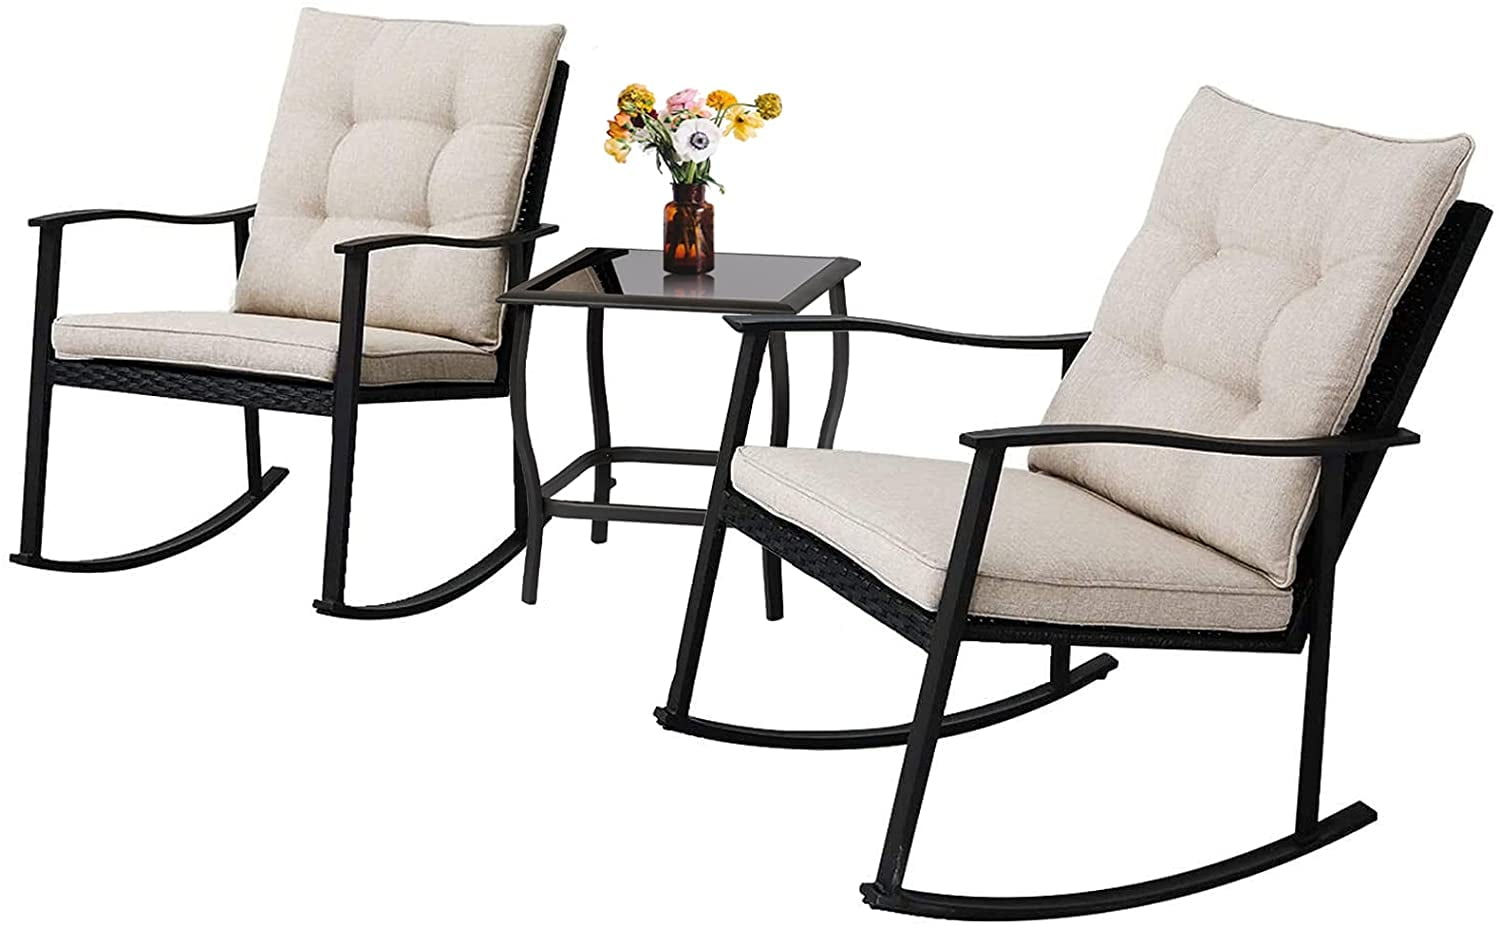 2 Swivel Rocker Patio Chairs with 4 Beige Cushions and 1 Glass Side Table,All-Weather Bistro Set for Patio 3 Pieces Patio Furniture Outdoor Wicker Rocking Chairs Set Balcony Backyard Brown